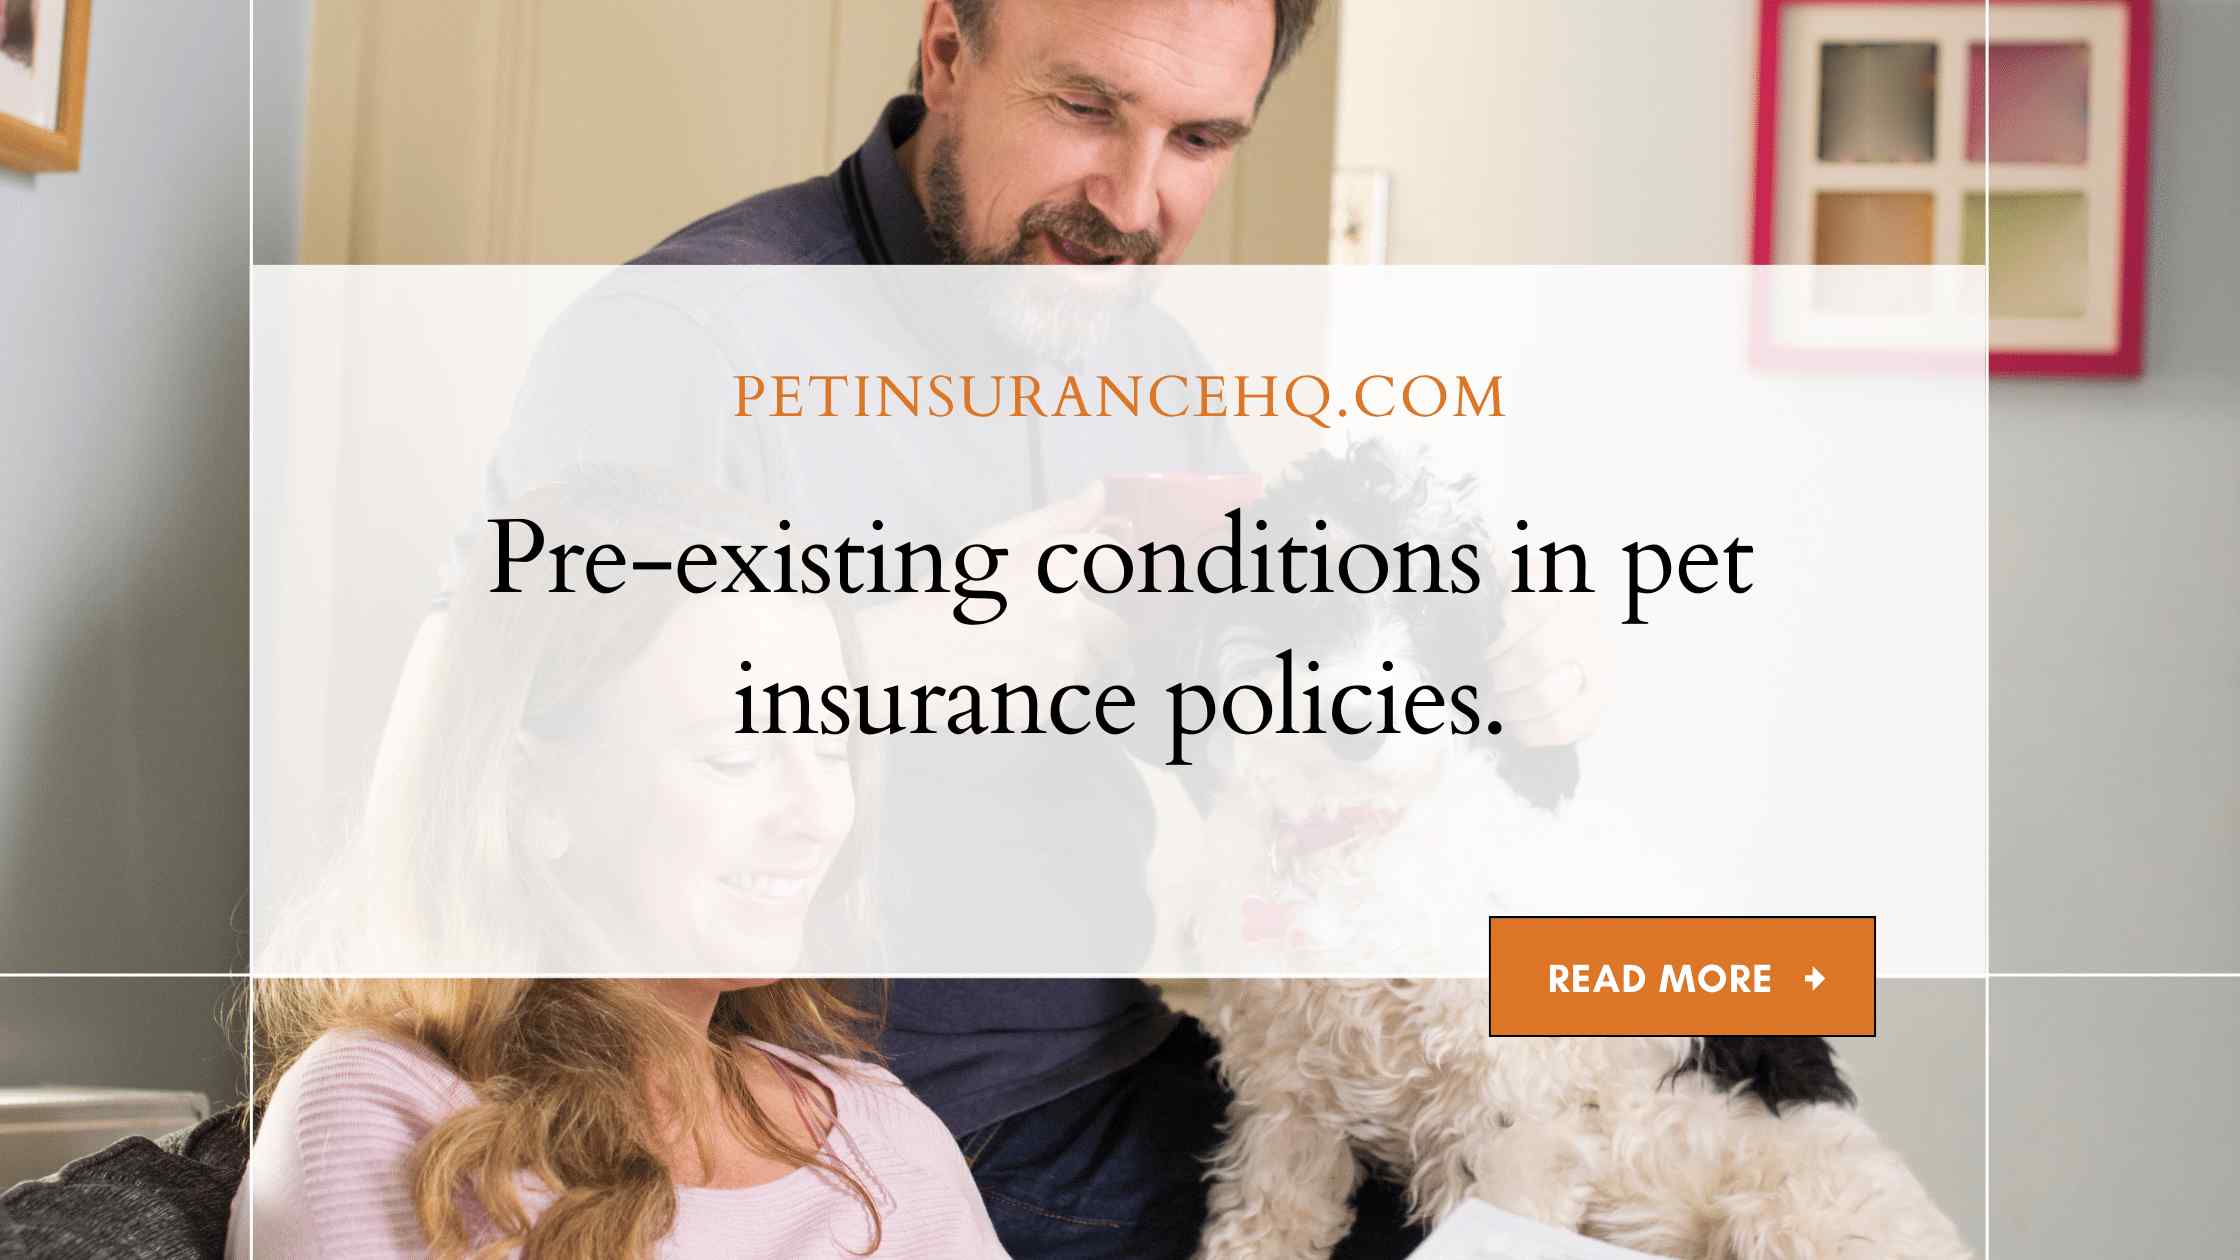 Understanding pre-existing conditions in pet insurance policies